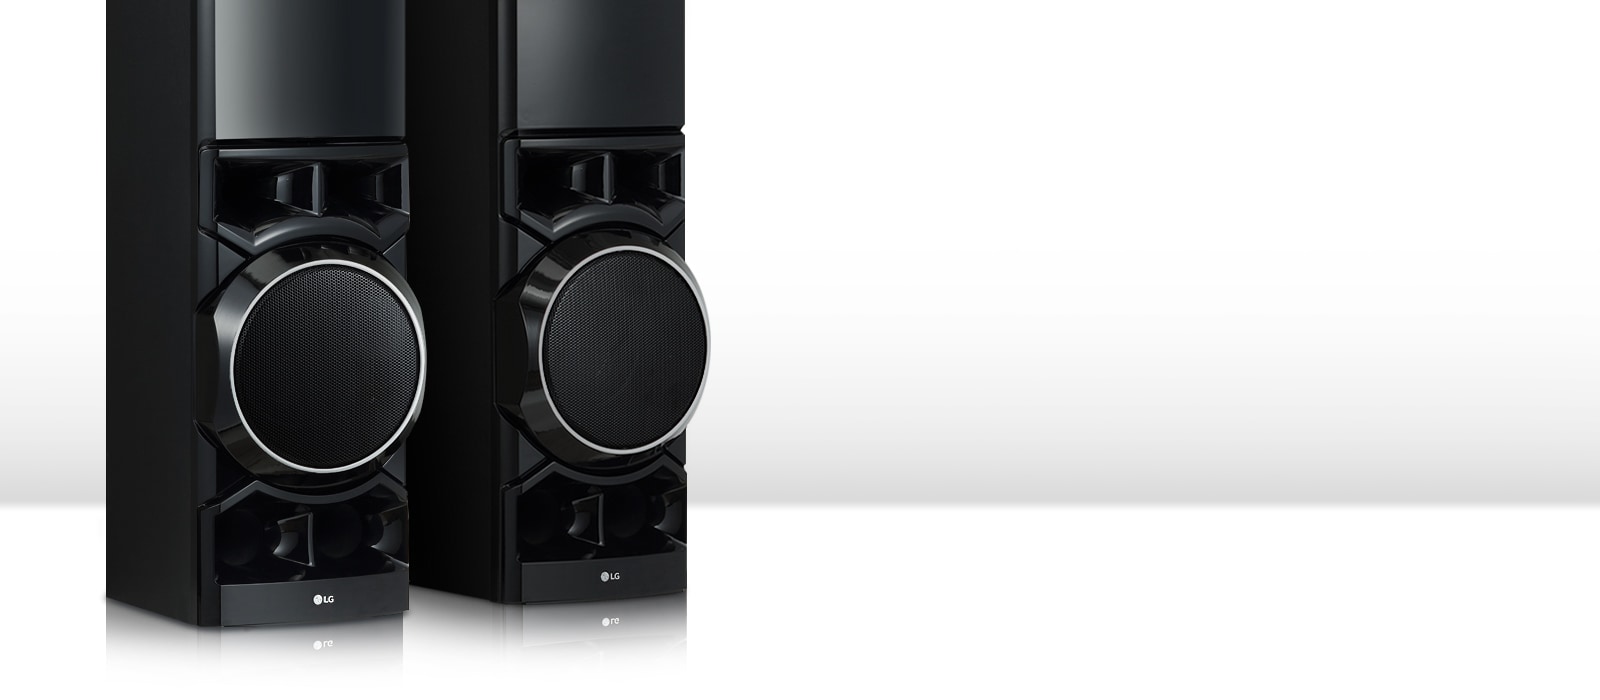 On the white living room, the lower part of the two tower speakers is seen big.